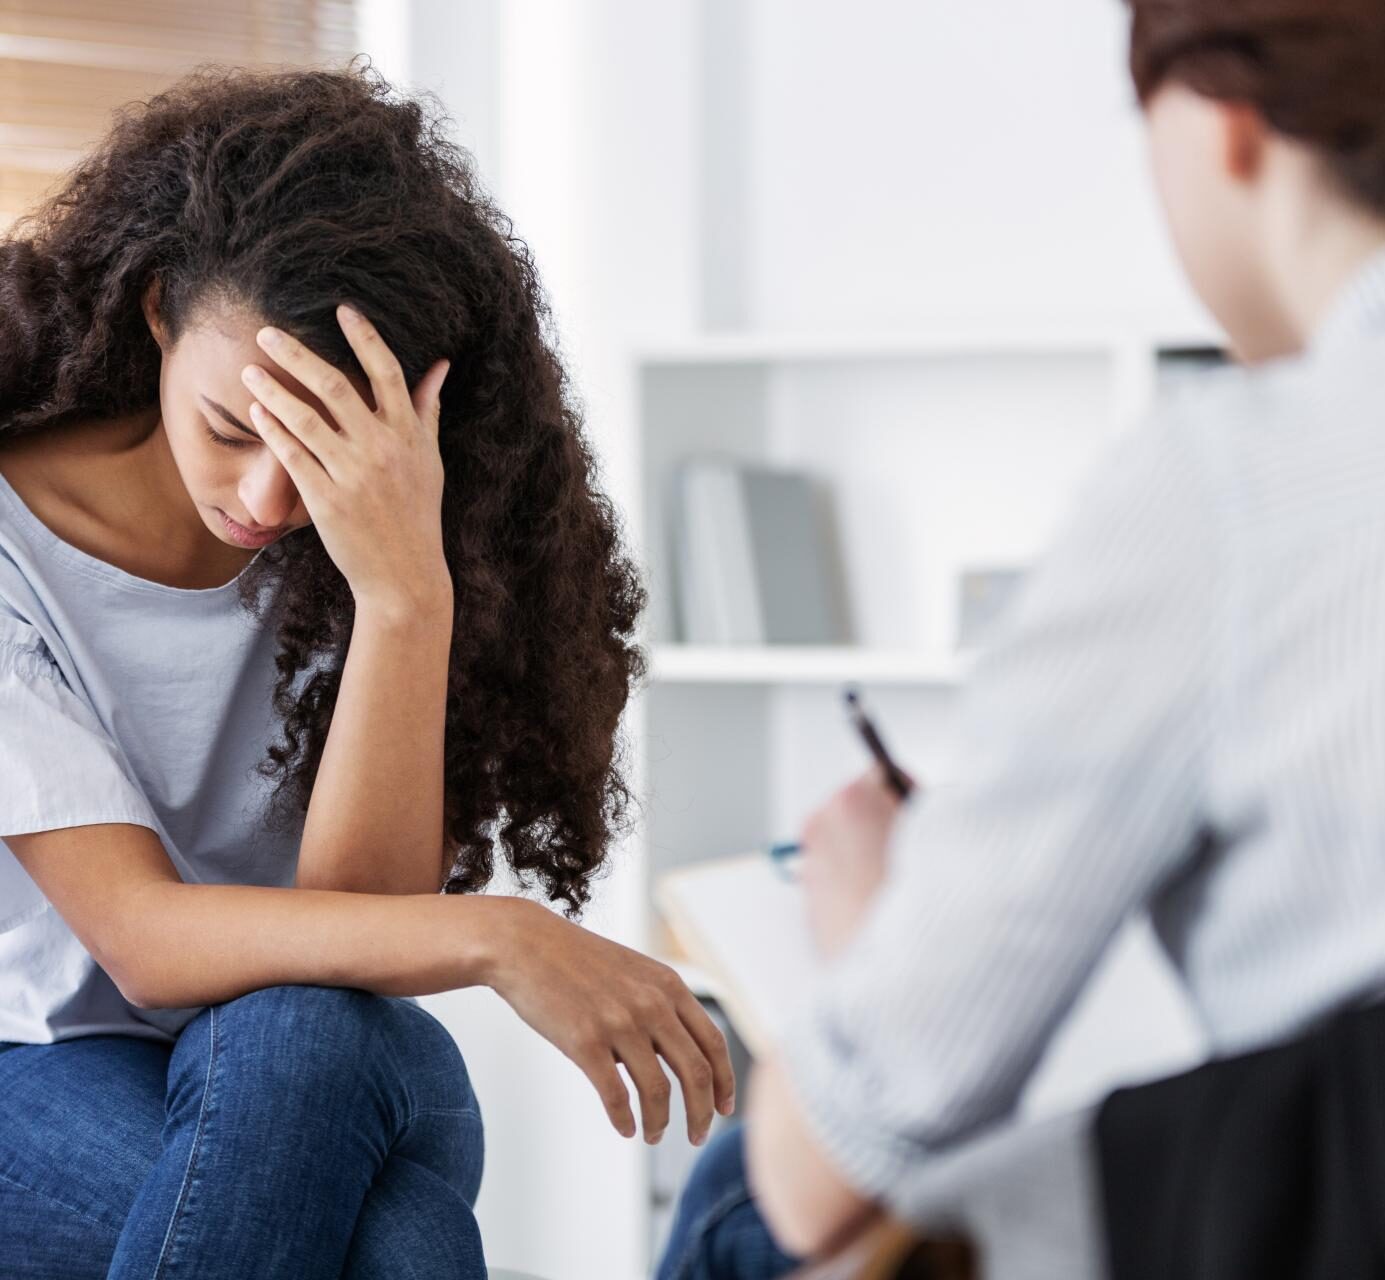 Assessment and Substance Abuse Treatment